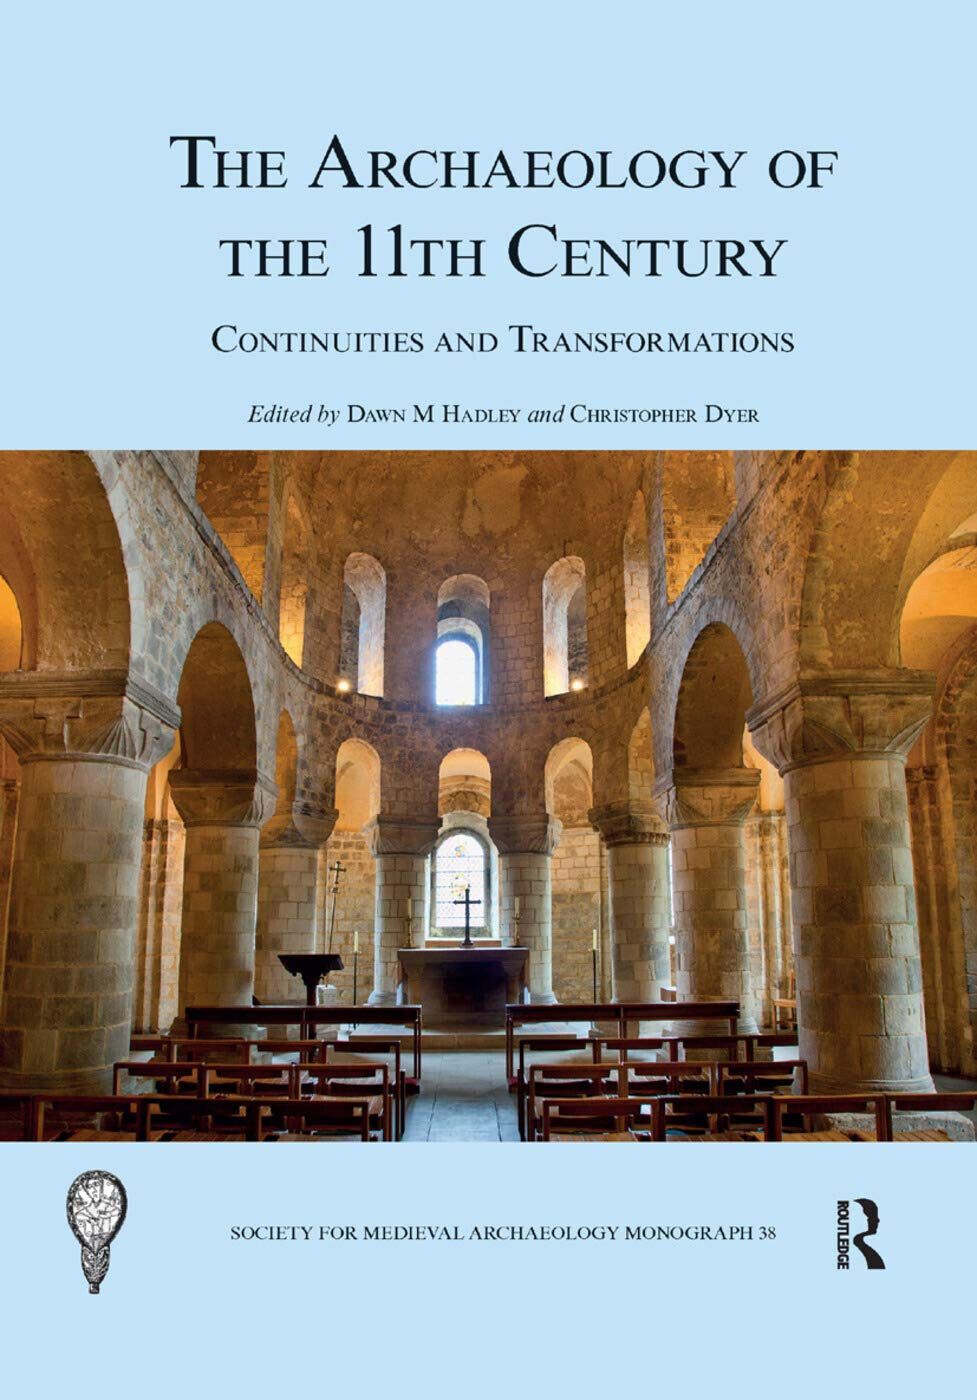 The Archaeology of the 11th Century - Dawn M Hadley  - Routledge, 2019